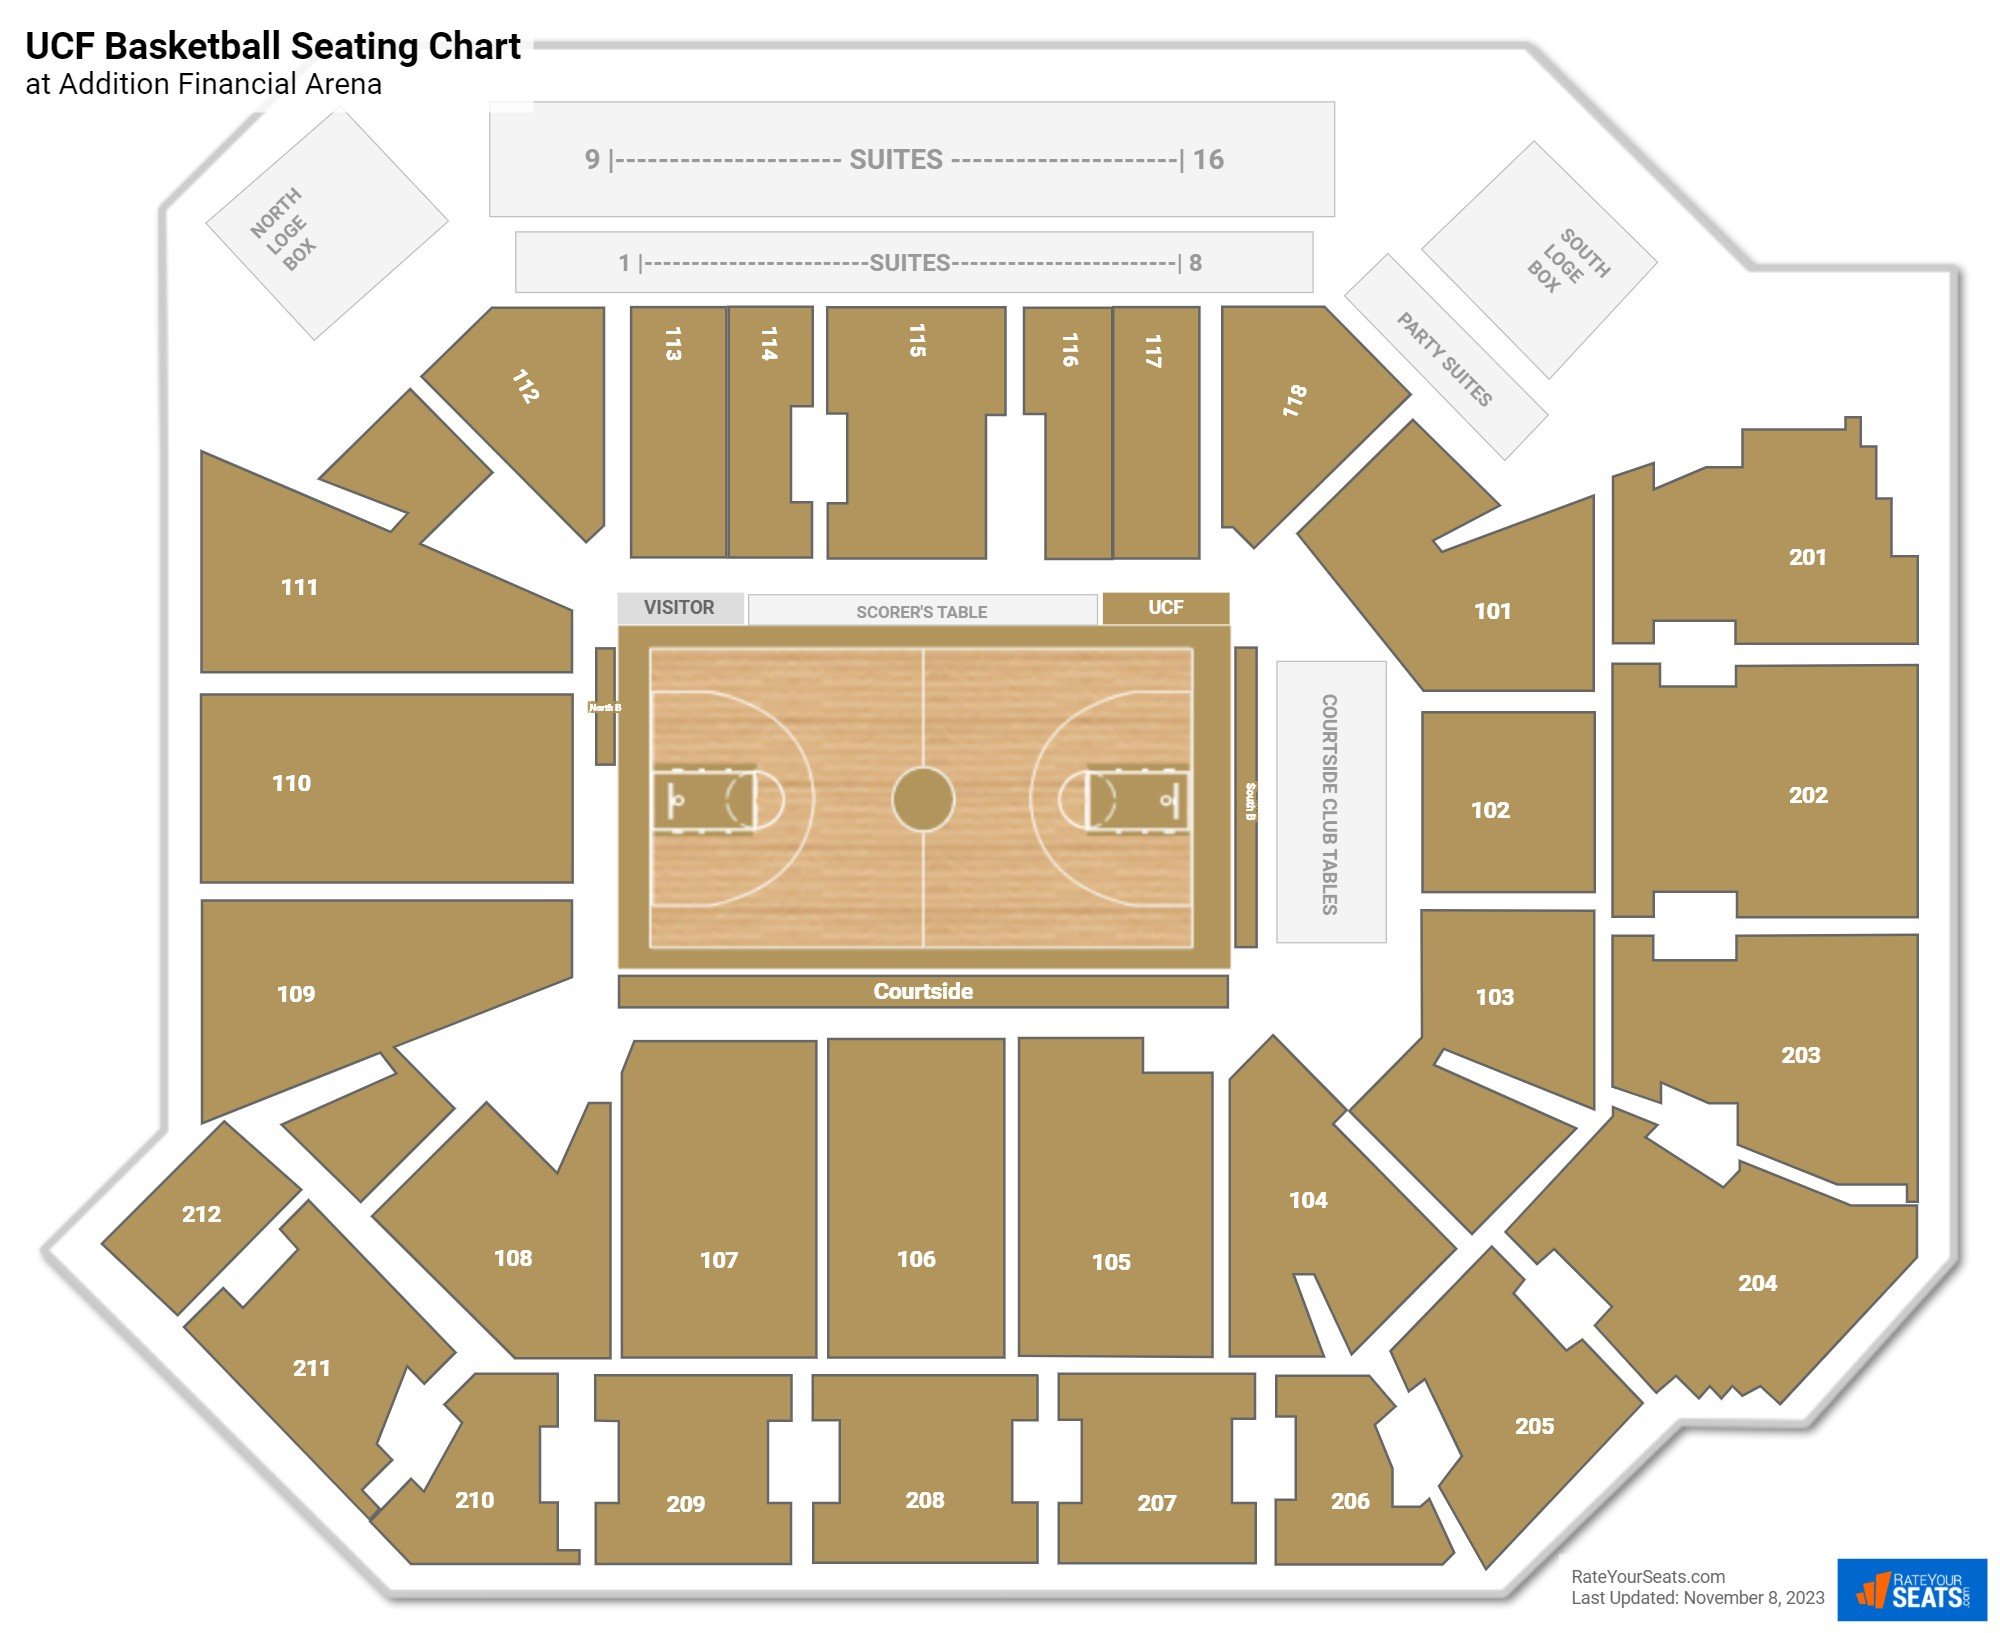 UCF Knights Seating Chart at Addition Financial Arena